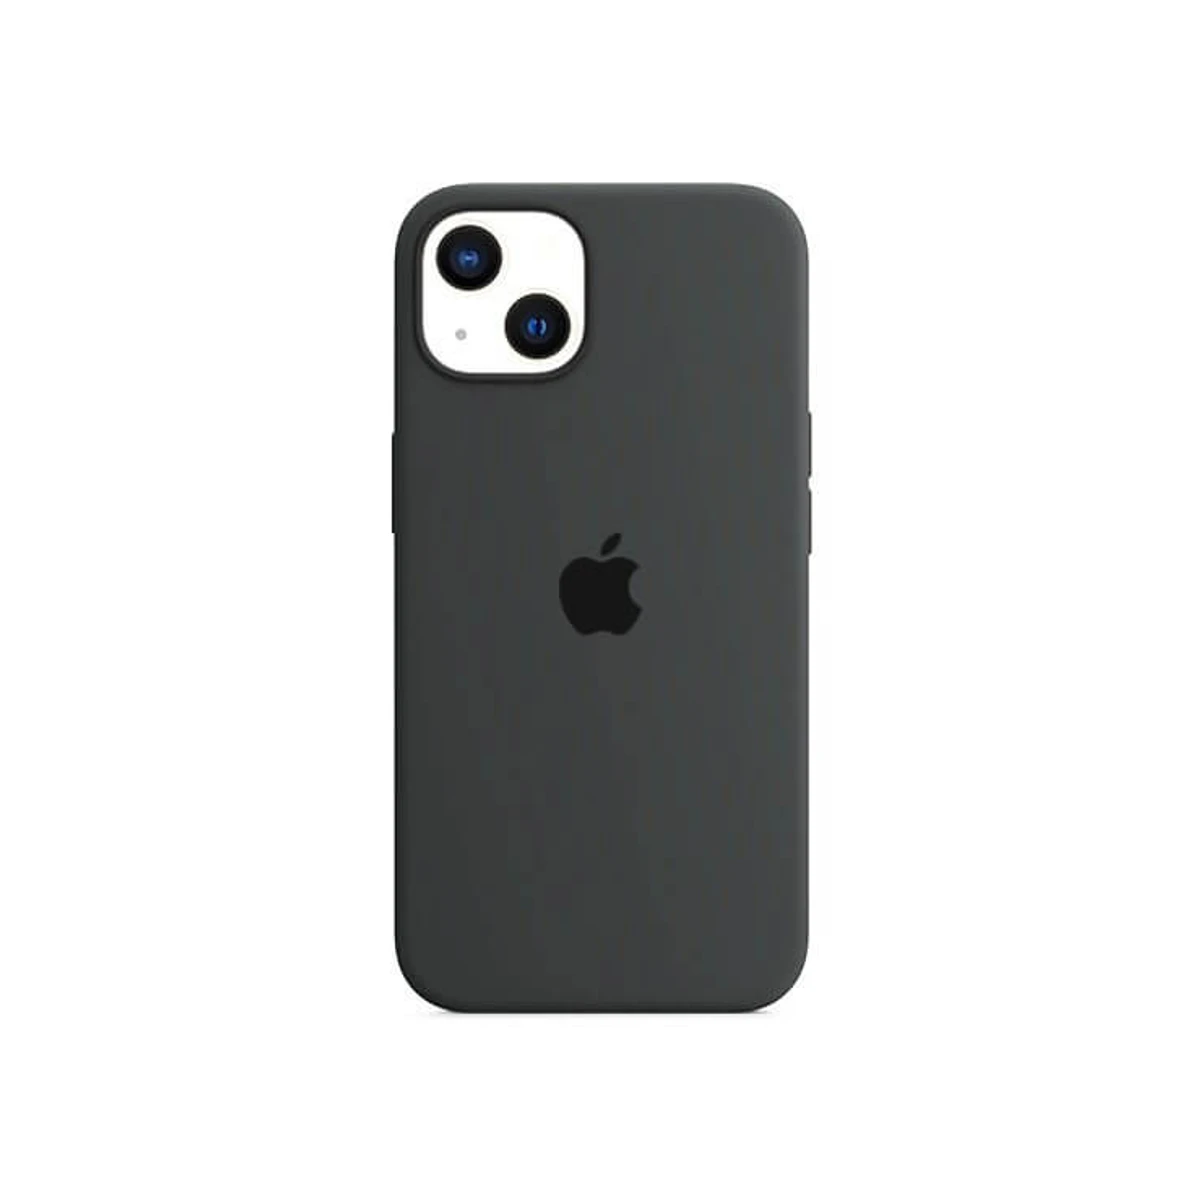 Silicone Case For iPhone 11